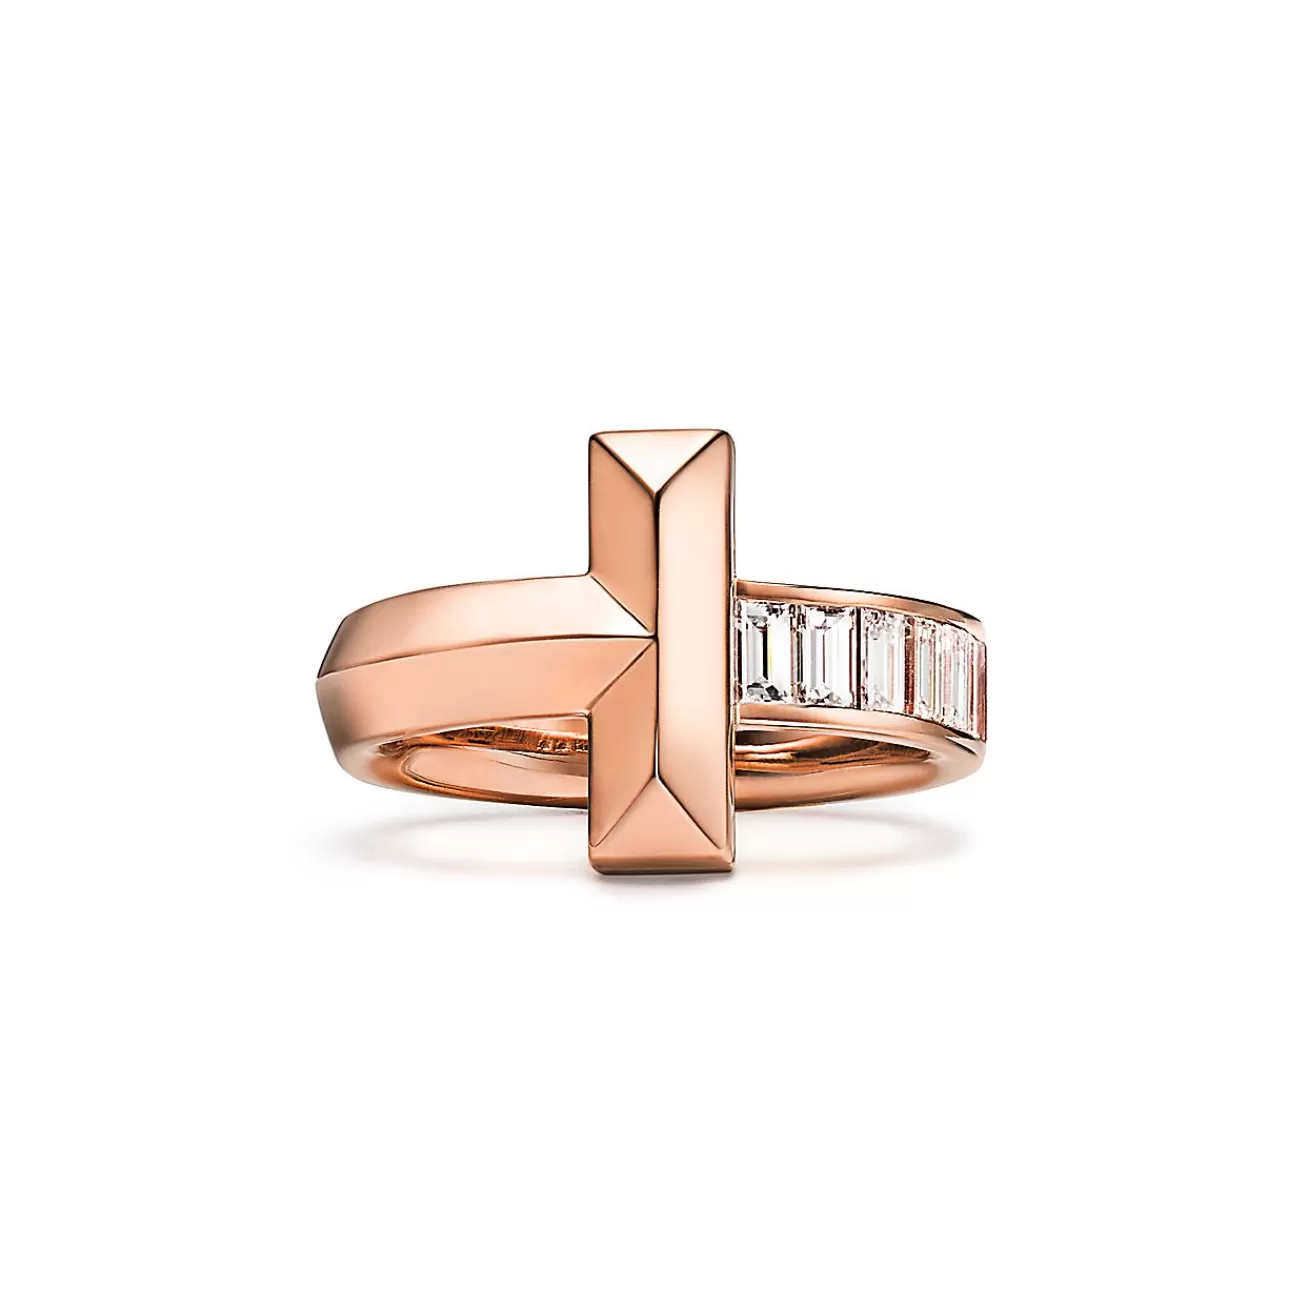 Tiffany & Co. Tiffany T T1 Ring in Rose Gold with Baguette Diamonds, 4.5 mm Wide | ^ Rings | Rose Gold Jewelry